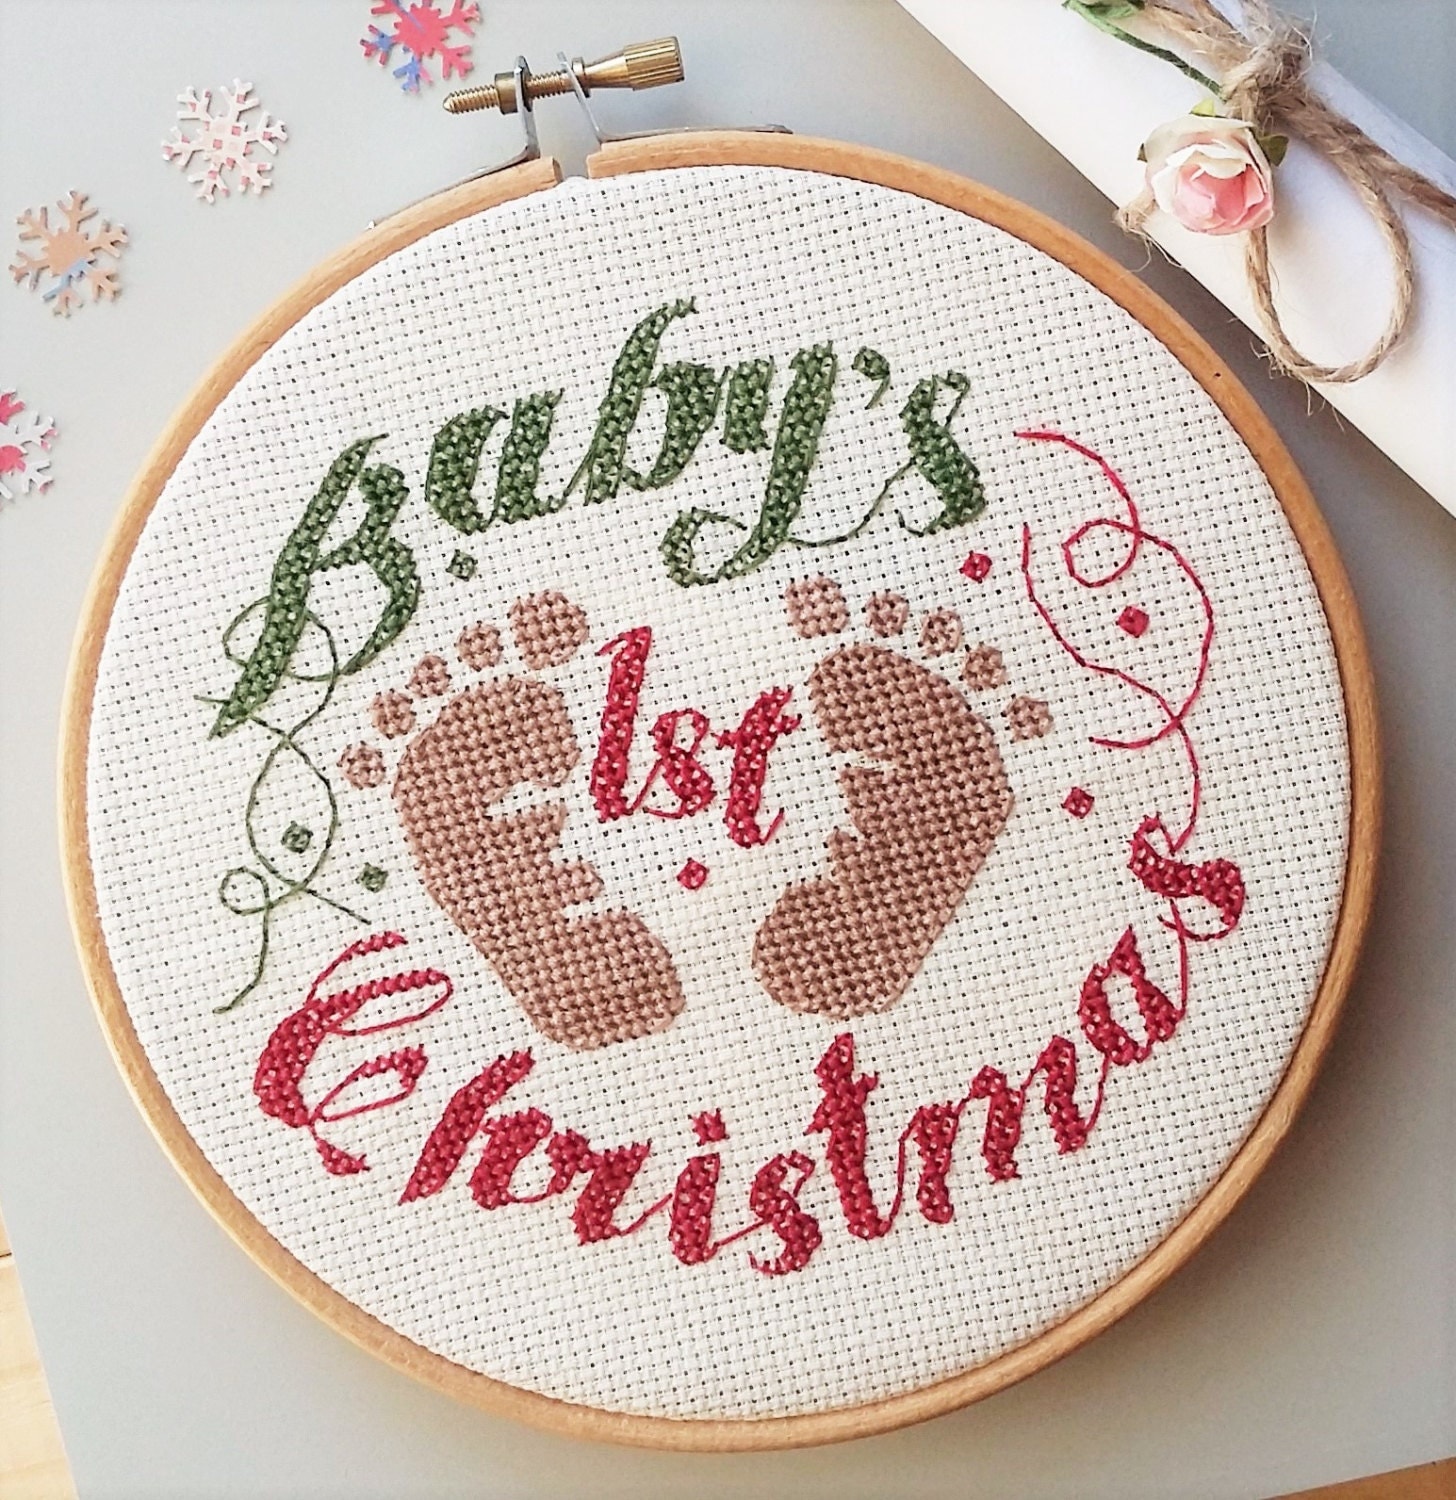 Baby's first Christmas cross stitch pattern A lovely